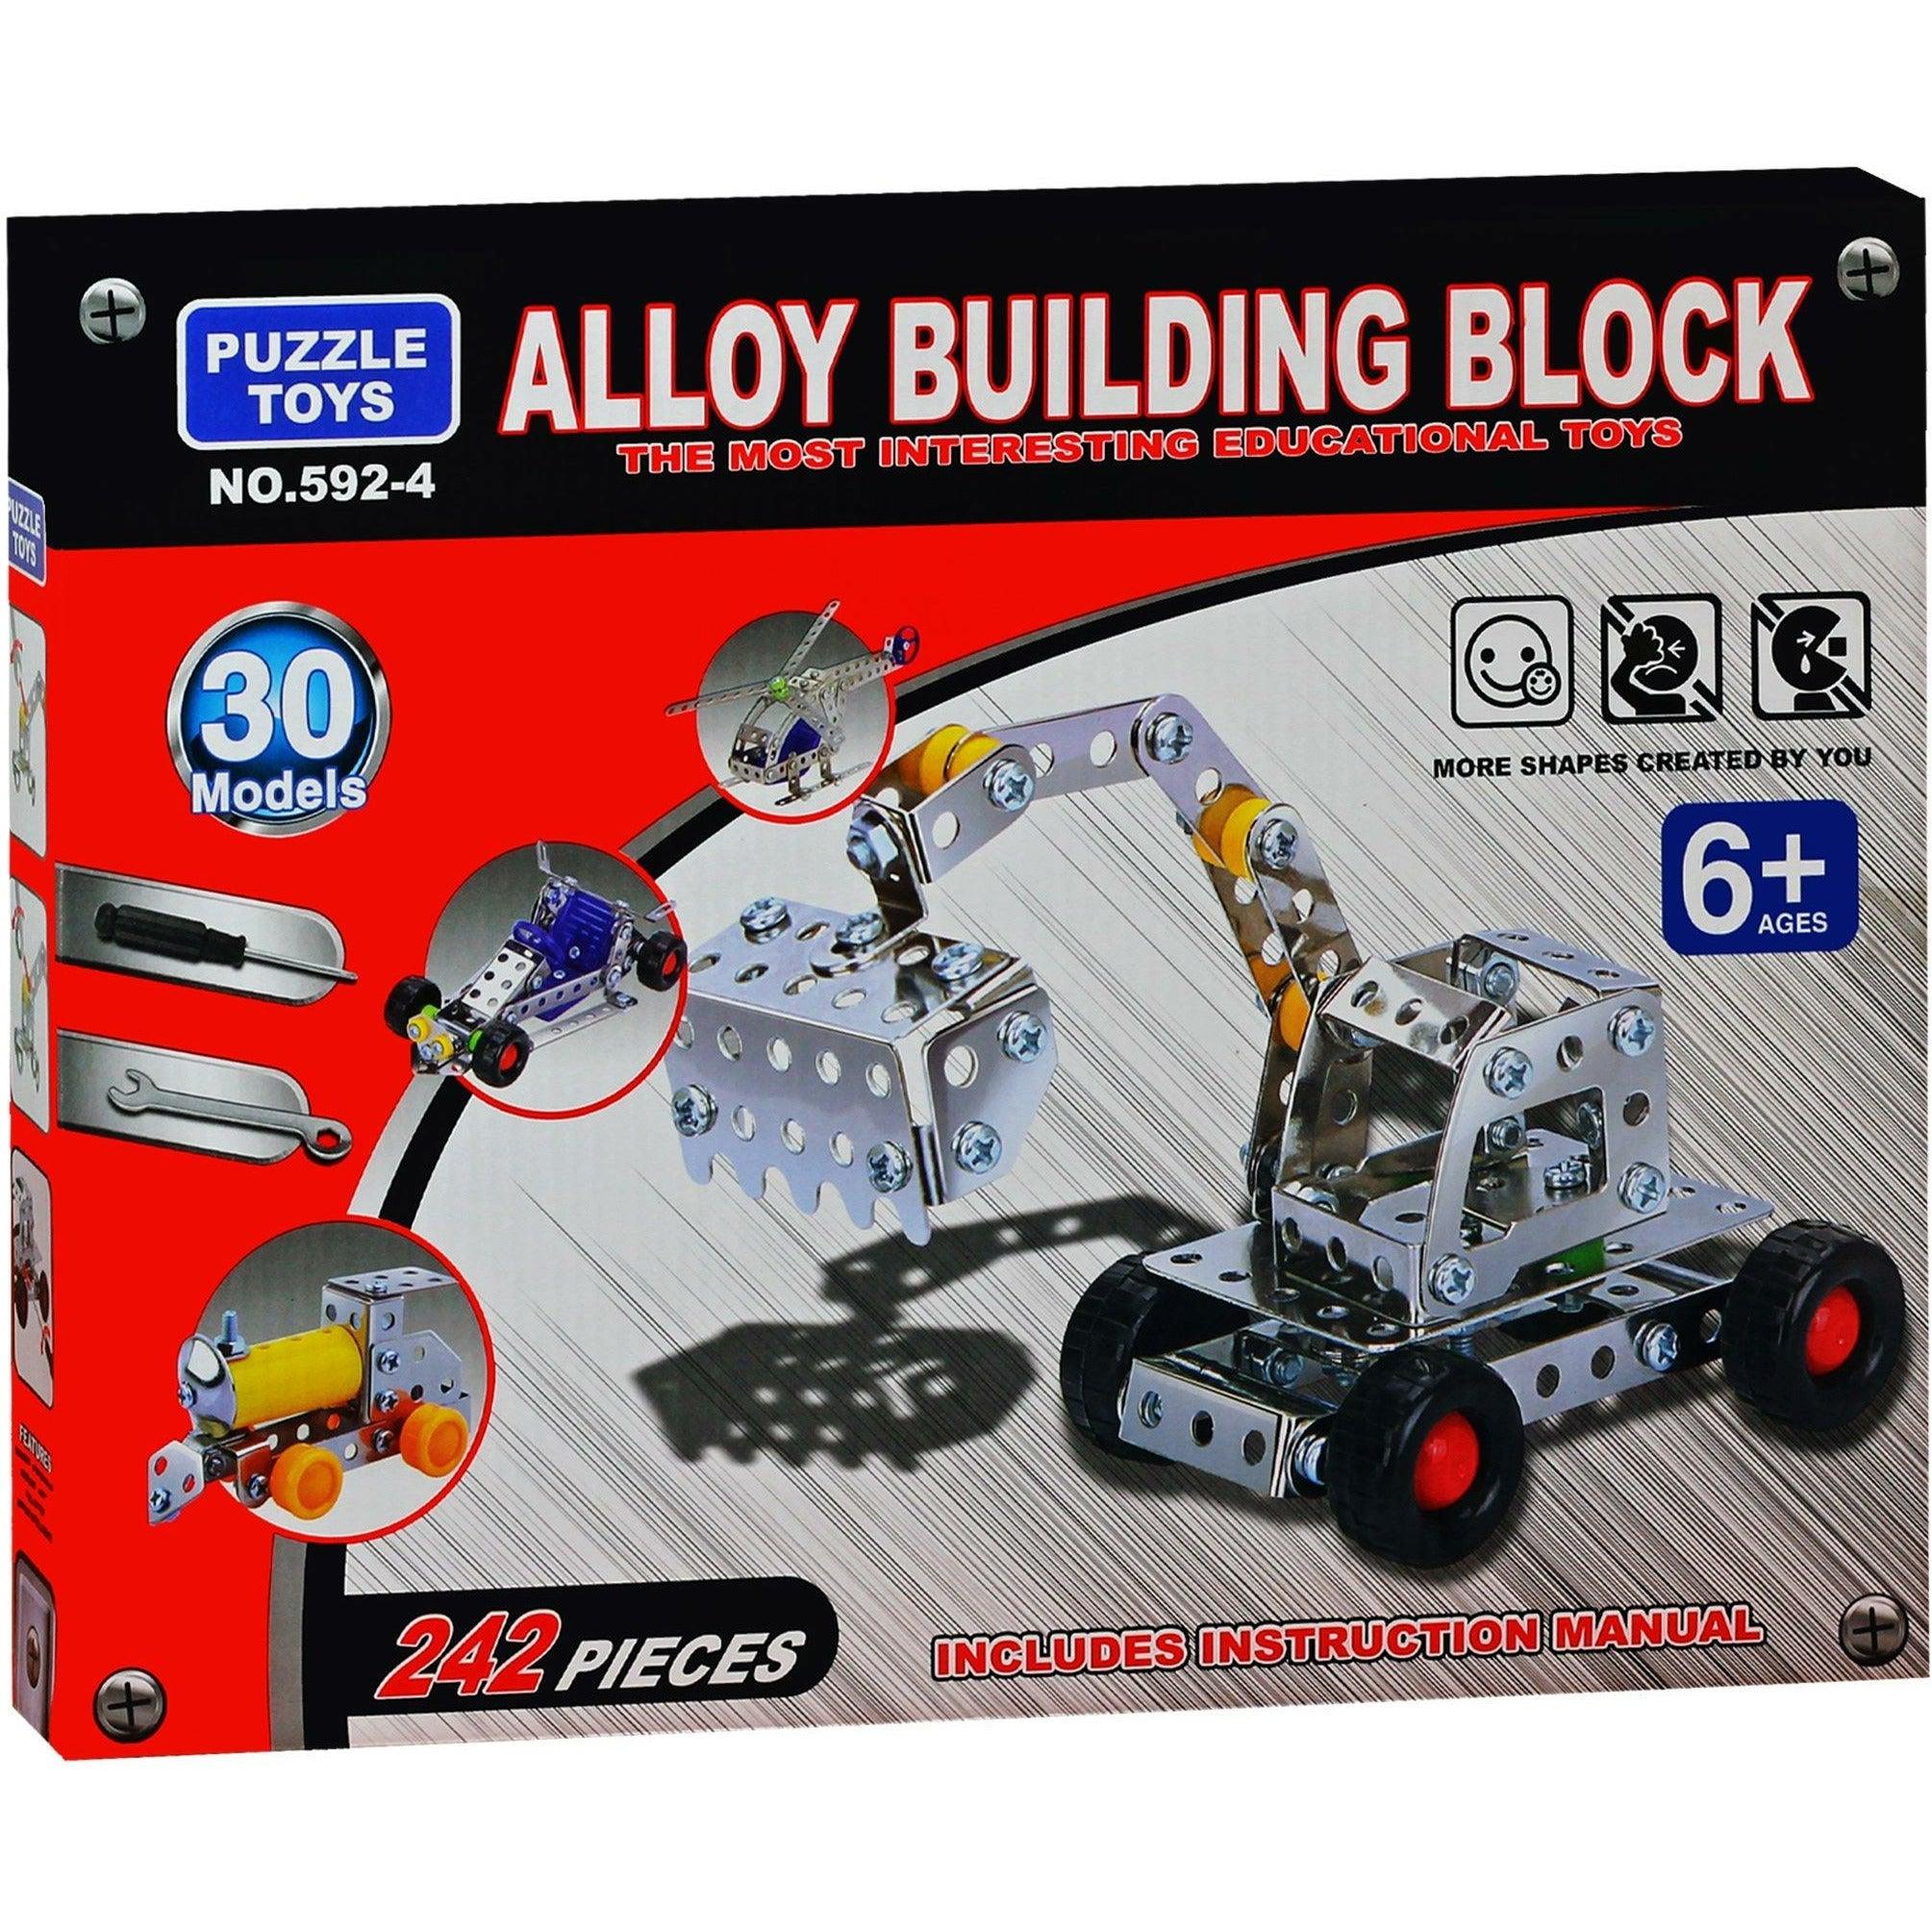 Alloy Building Blocks 30 Model 242 Pieces - BumbleToys - 5-7 Years, Boys, Building Sets & Blocks, Toy House